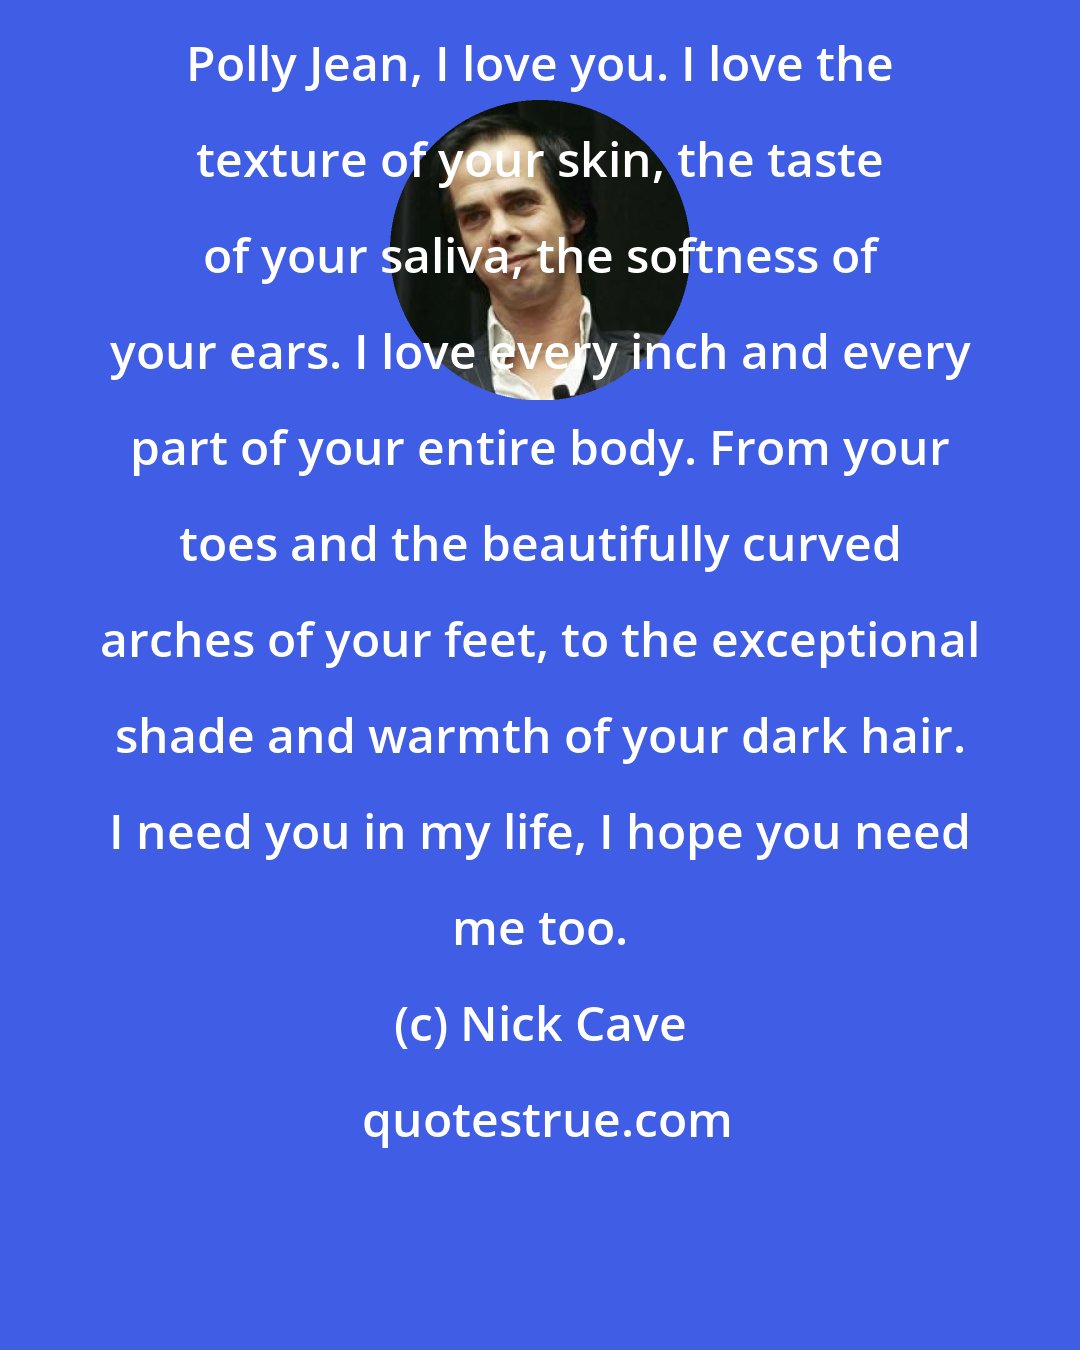 Nick Cave: Polly Jean, I love you. I love the texture of your skin, the taste of your saliva, the softness of your ears. I love every inch and every part of your entire body. From your toes and the beautifully curved arches of your feet, to the exceptional shade and warmth of your dark hair. I need you in my life, I hope you need me too.